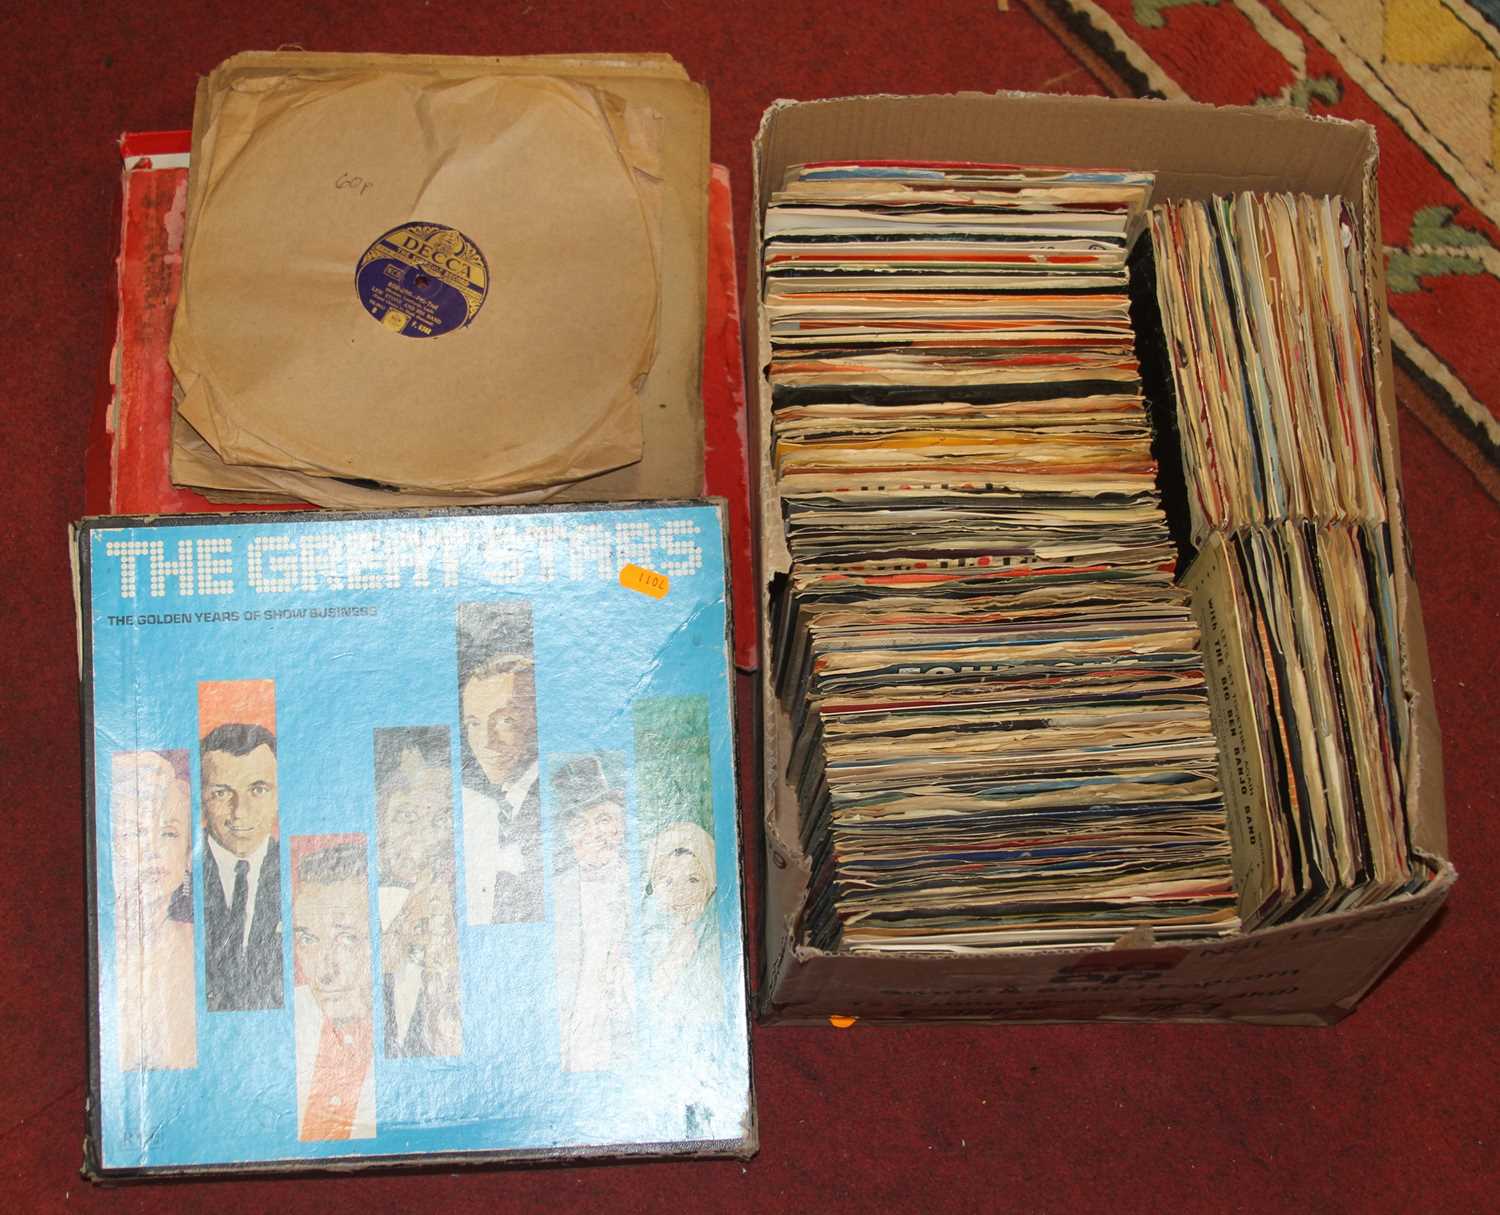 A collection of vintage LPs and singles, to include The Great Stars - The Golden Years of Show